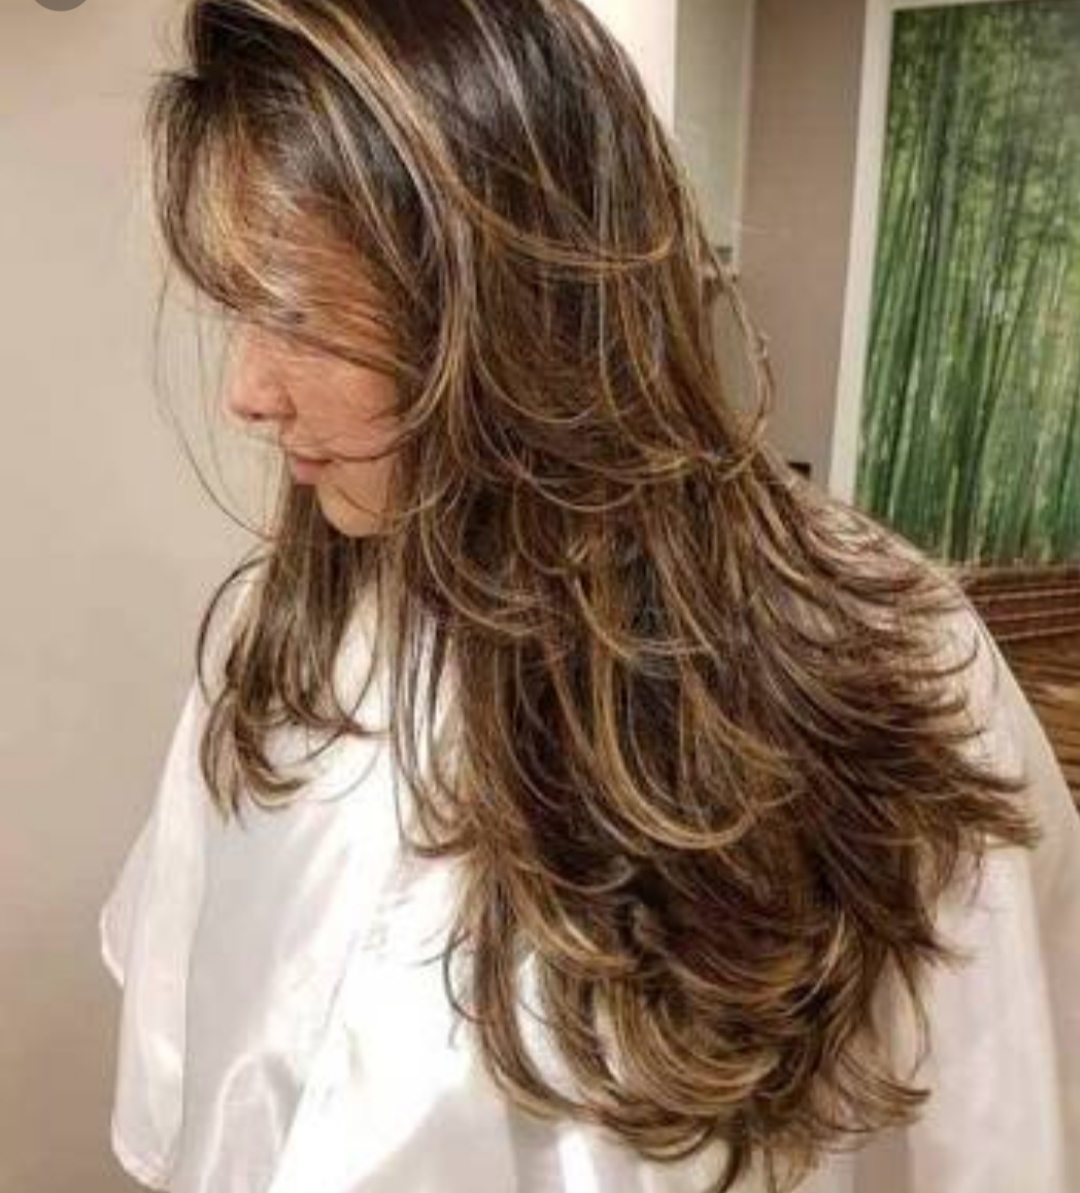 How to use DENMAN BRUSH on Loose Curly Hair for BEST DEFINITION   Madhushree Joshi